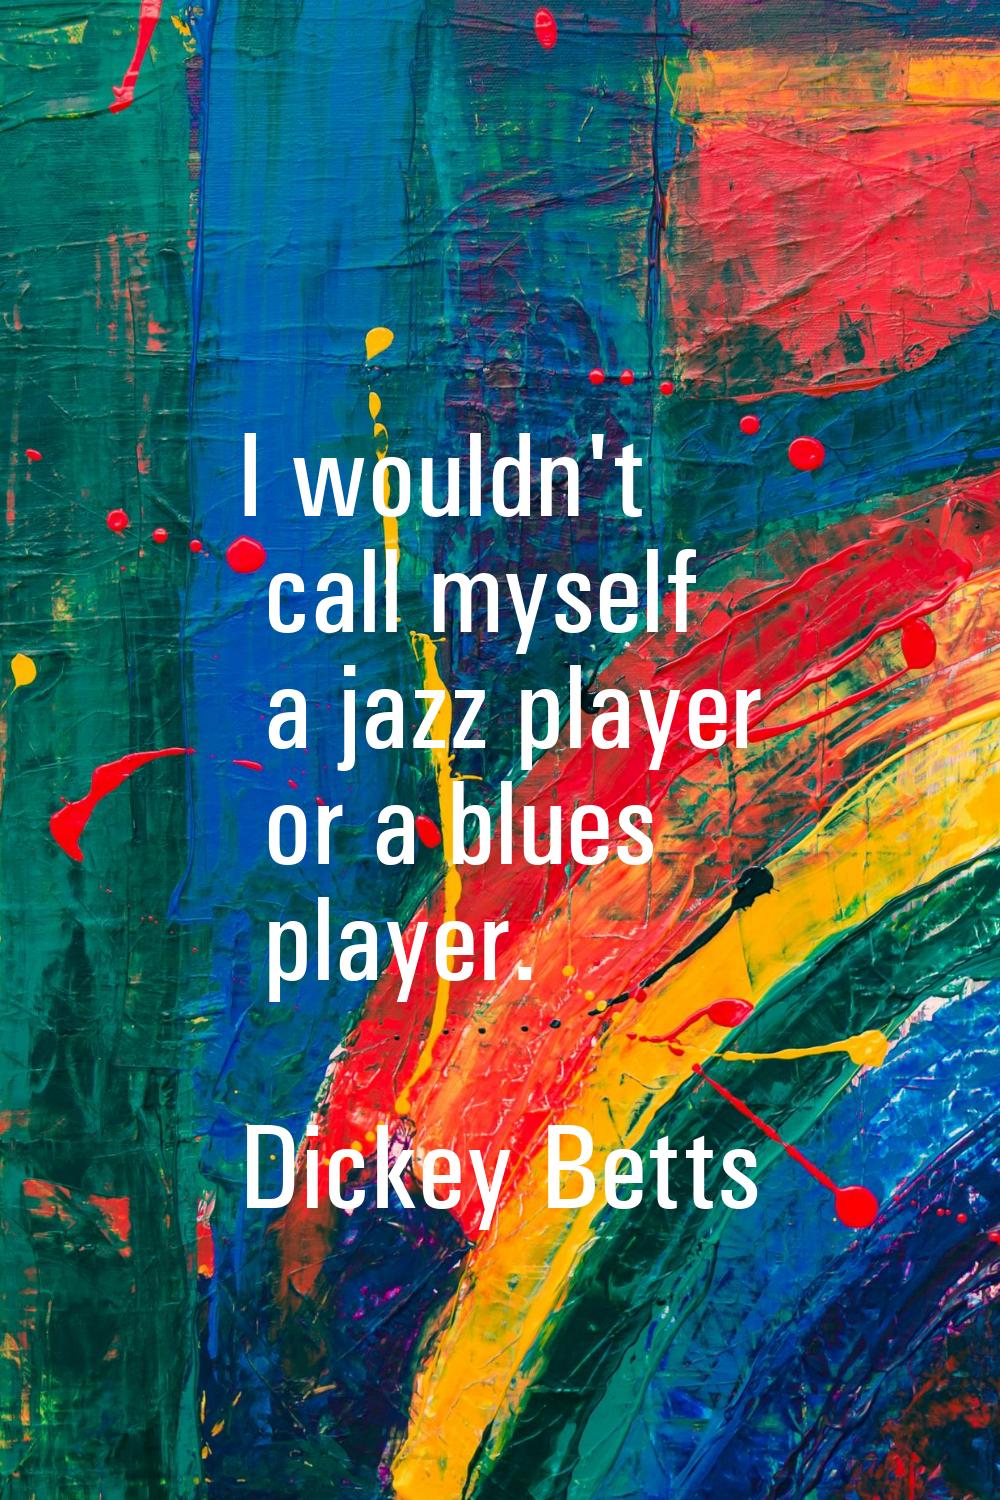 I wouldn't call myself a jazz player or a blues player.